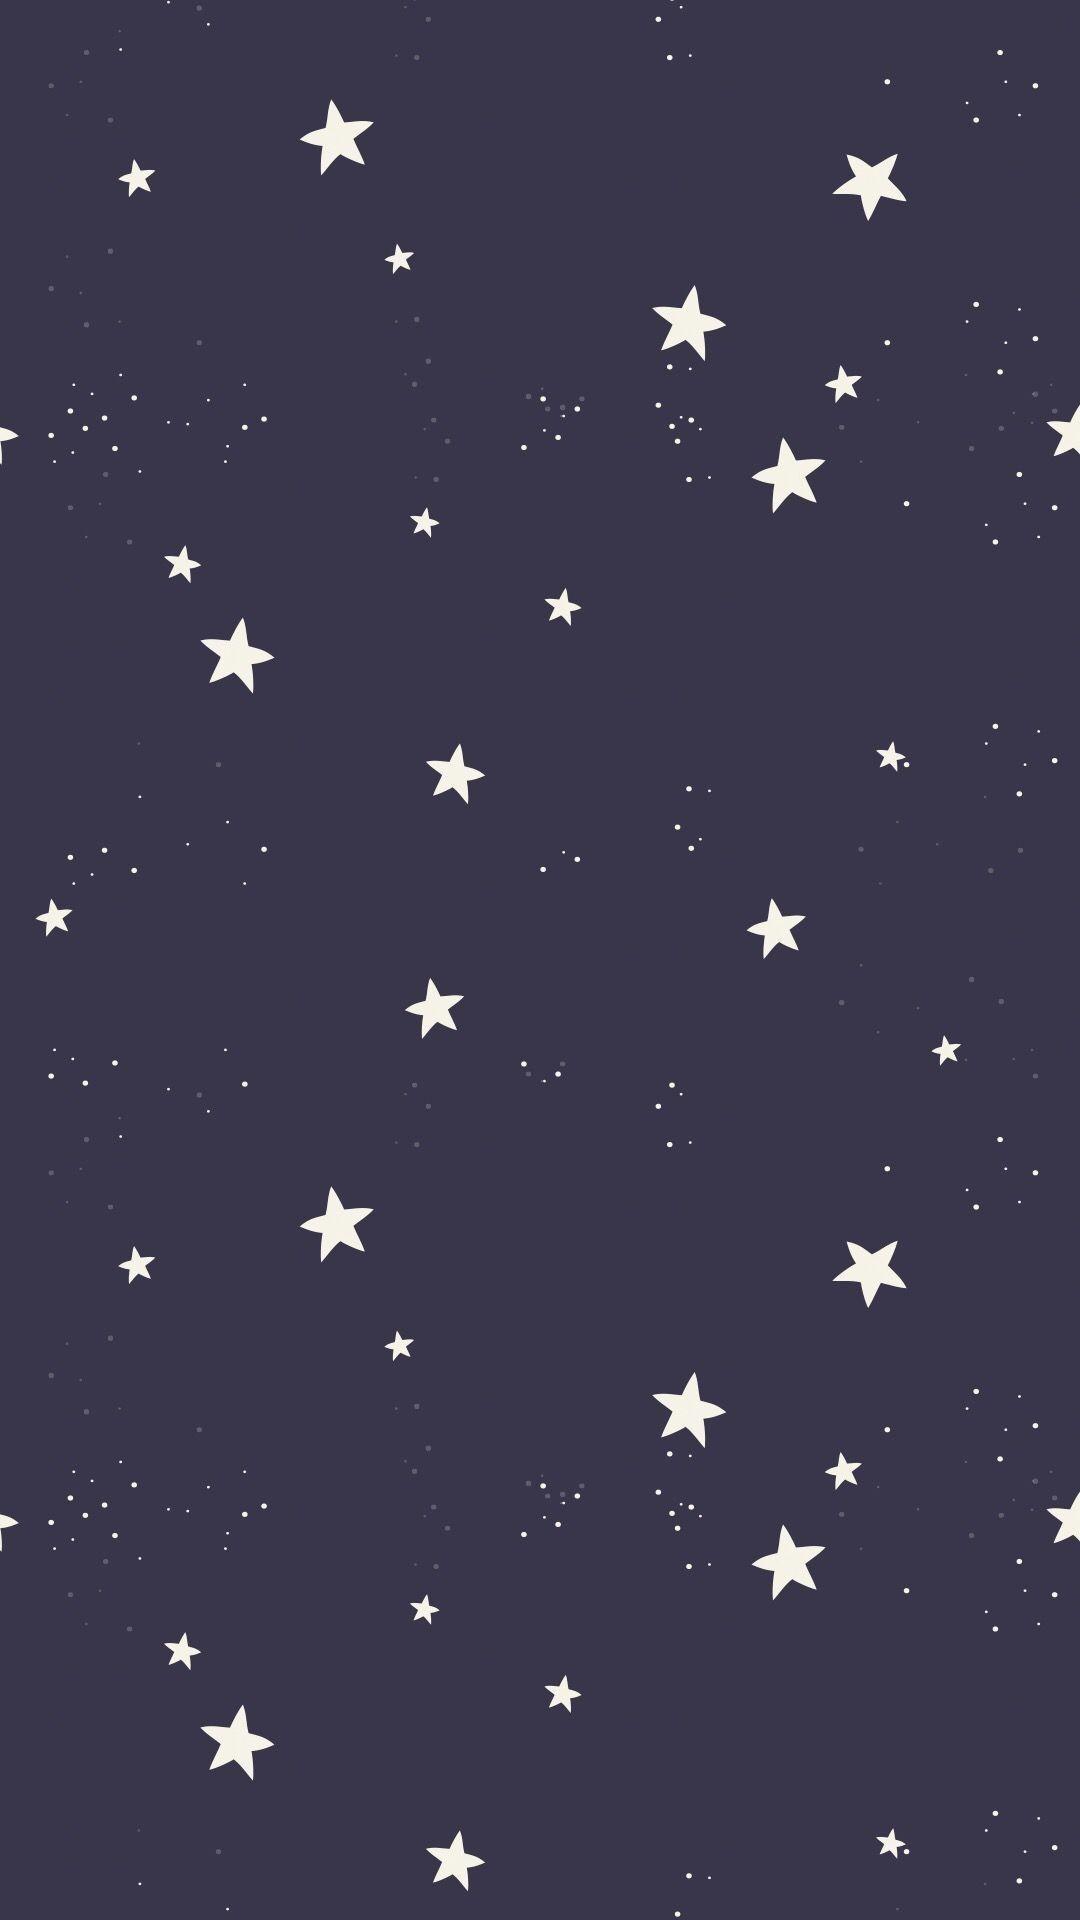 wallpaper #background #iphone #mobile #space #stars #pattern